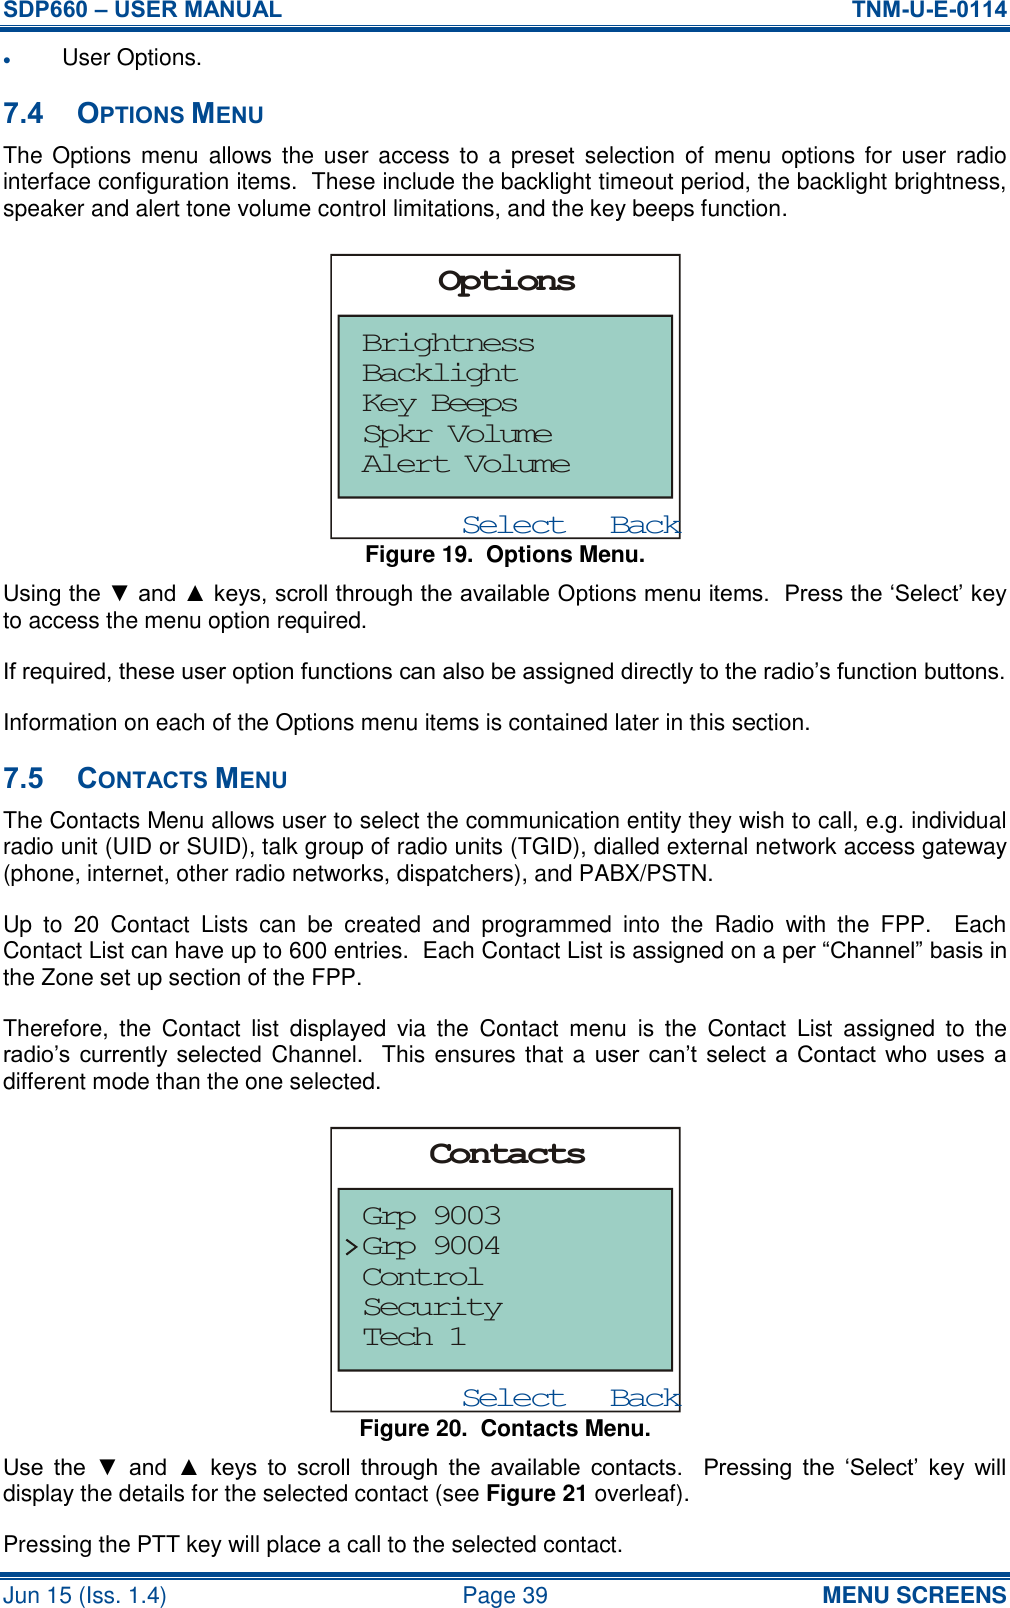 SDP660 – USER MANUAL  TNM-U-E-0114 Jun 15 (Iss. 1.4)  Page 39 MENU SCREENS  User Options. 7.4 OPTIONS MENU The Options menu  allows the  user  access to a preset  selection of  menu  options  for  user radio interface configuration items.  These include the backlight timeout period, the backlight brightness, speaker and alert tone volume control limitations, and the key beeps function. Figure 19.  Options Menu. Using the ▼ and ▲ keys, scroll through the available Options menu items.  Press the ‘Select’ key to access the menu option required. If required, these user option functions can also be assigned directly to the radio’s function buttons. Information on each of the Options menu items is contained later in this section. 7.5 CONTACTS MENU The Contacts Menu allows user to select the communication entity they wish to call, e.g. individual radio unit (UID or SUID), talk group of radio units (TGID), dialled external network access gateway (phone, internet, other radio networks, dispatchers), and PABX/PSTN. Up  to  20  Contact  Lists  can  be  created  and  programmed  into  the  Radio  with  the  FPP.    Each Contact List can have up to 600 entries.  Each Contact List is assigned on a per “Channel” basis in the Zone set up section of the FPP. Therefore,  the  Contact  list  displayed  via  the  Contact  menu  is  the  Contact  List  assigned  to  the radio’s currently selected  Channel.  This ensures that a user  can’t  select a  Contact who  uses  a different mode than the one selected. Figure 20.  Contacts Menu. Use  the  ▼  and  ▲  keys  to  scroll  through  the  available  contacts.    Pressing  the  ‘Select’  key  will display the details for the selected contact (see Figure 21 overleaf). Pressing the PTT key will place a call to the selected contact. BackSelectOptionsBrightnessAlert VolumeSpkr VolumeKey BeepsBacklightBackSelectContactsGrp 9003Grp 9004ControlSecurityTech 1